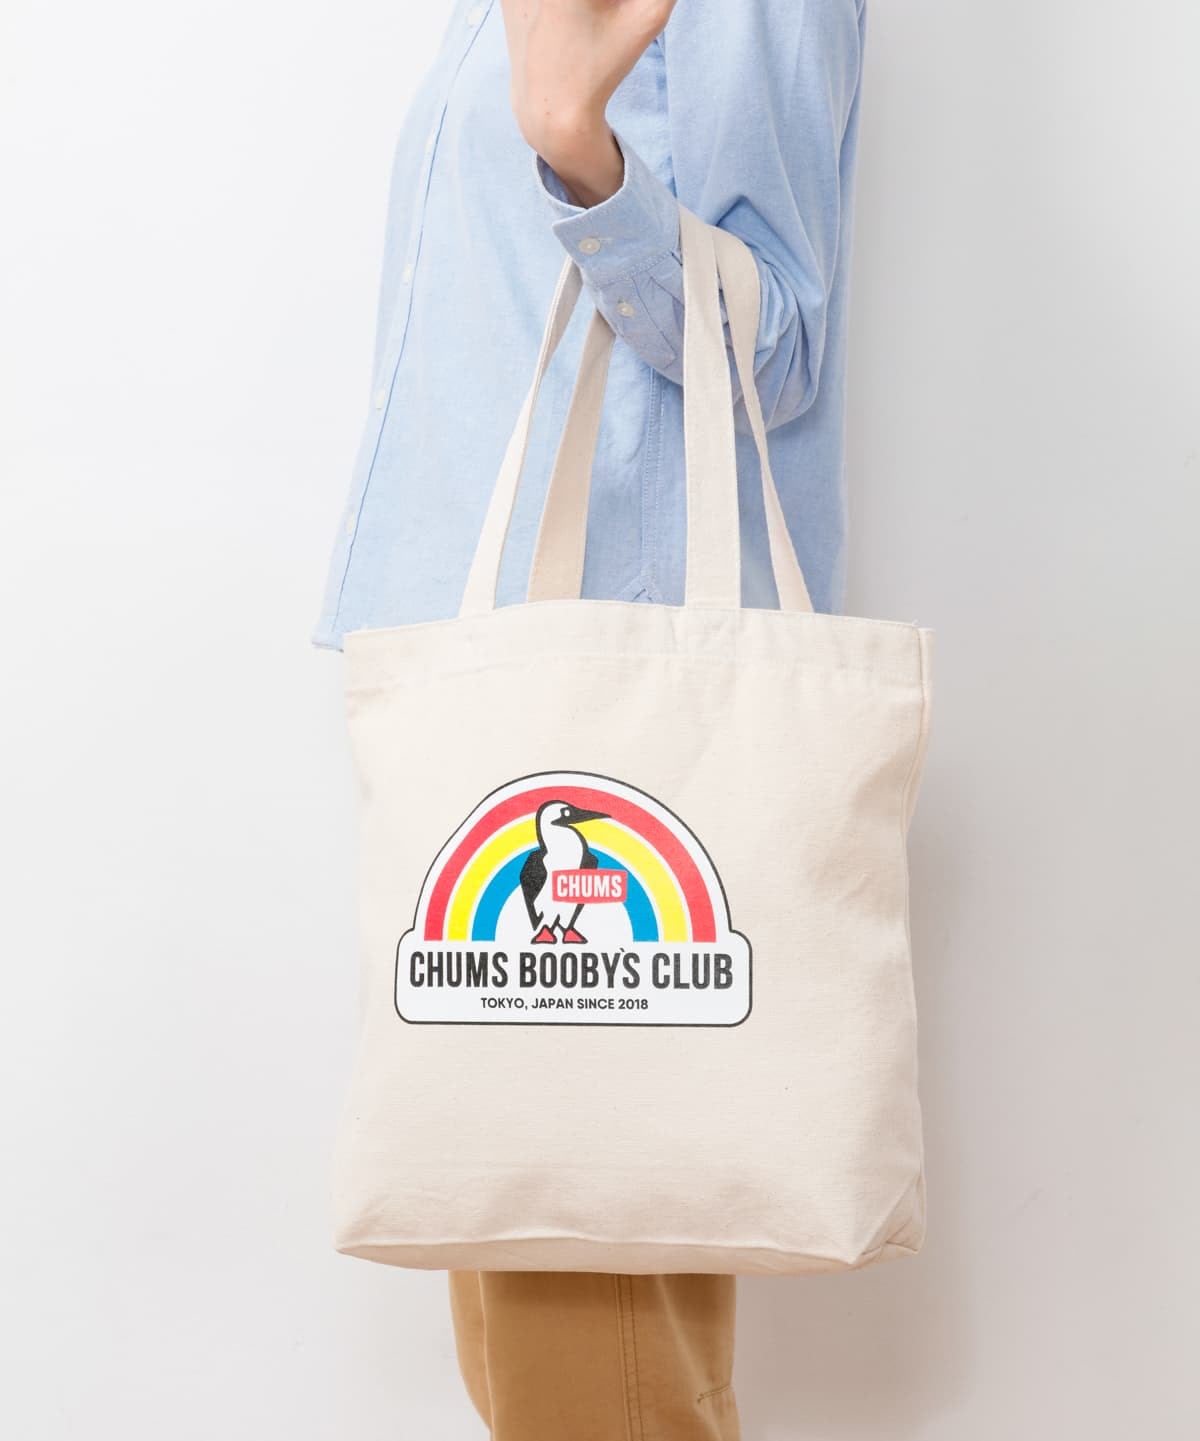 CHUMS Booby's Club Tote Bag(チャムスブービーズクラブトートバッグ)